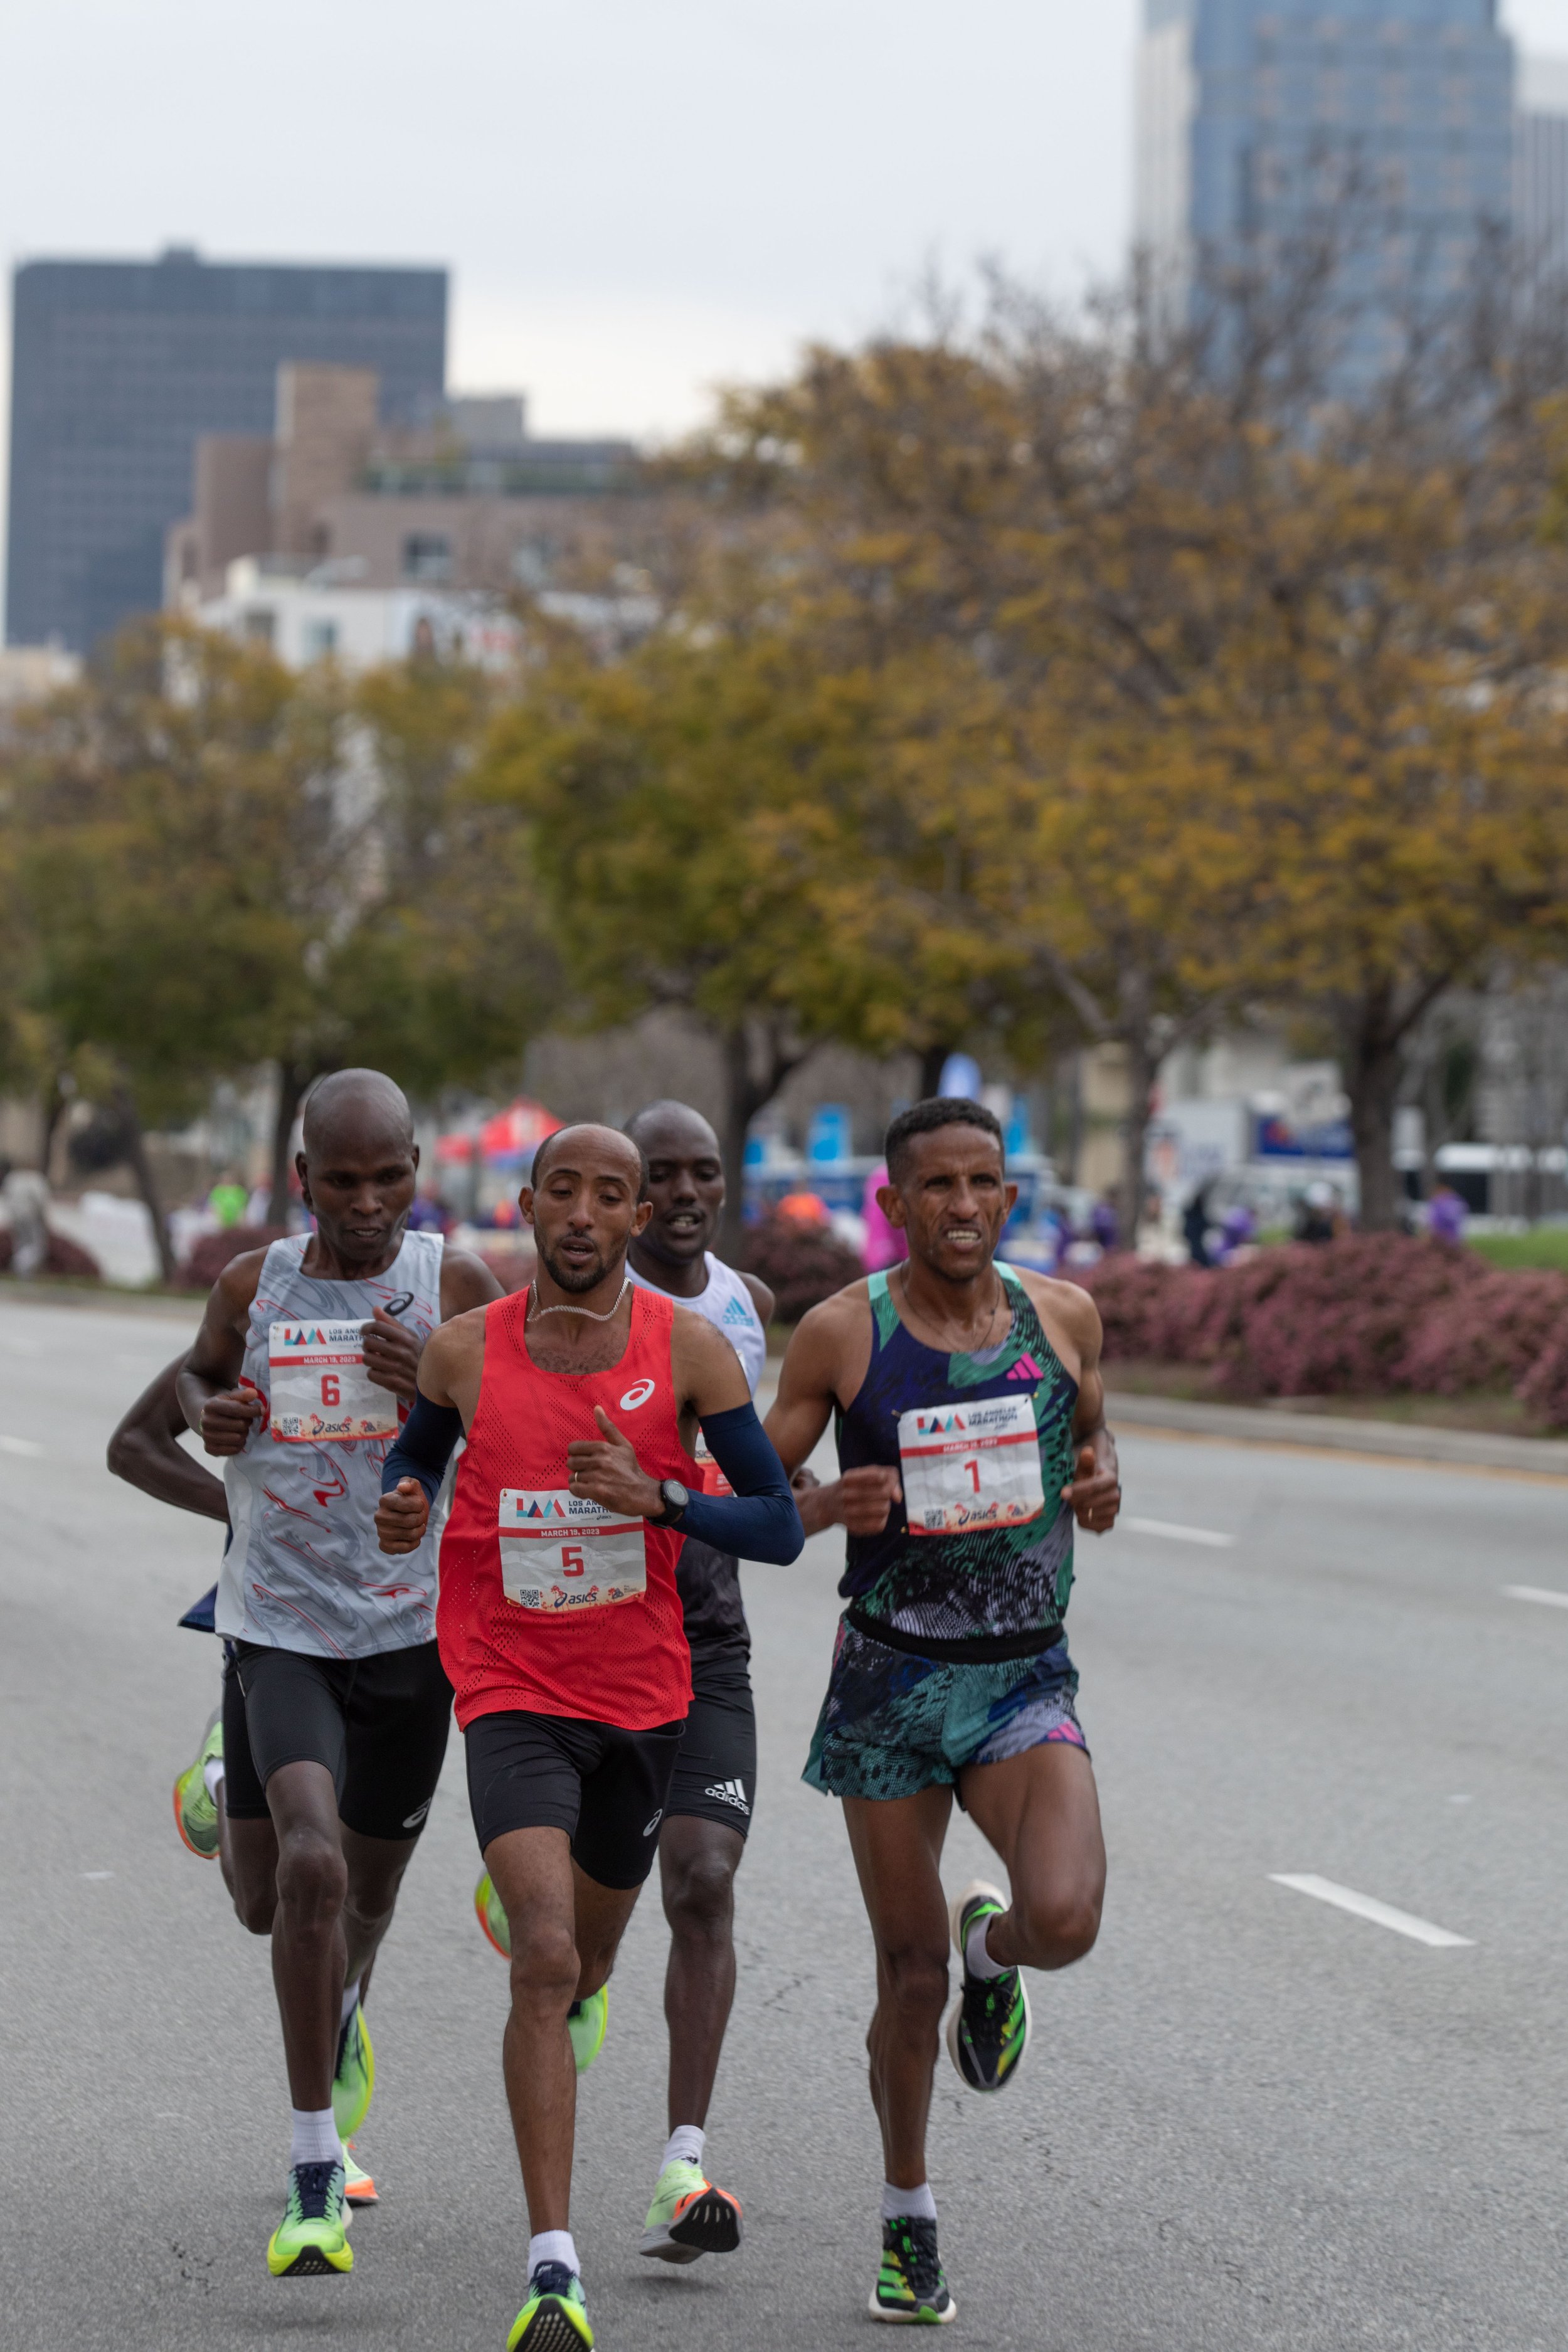  The advance group of Elite runners passing through mile 19 at the L.A. Marathon on Sunday, March 19, 2023. Los Angeles, Calif. (Jorge Devotto | The Corsair) 